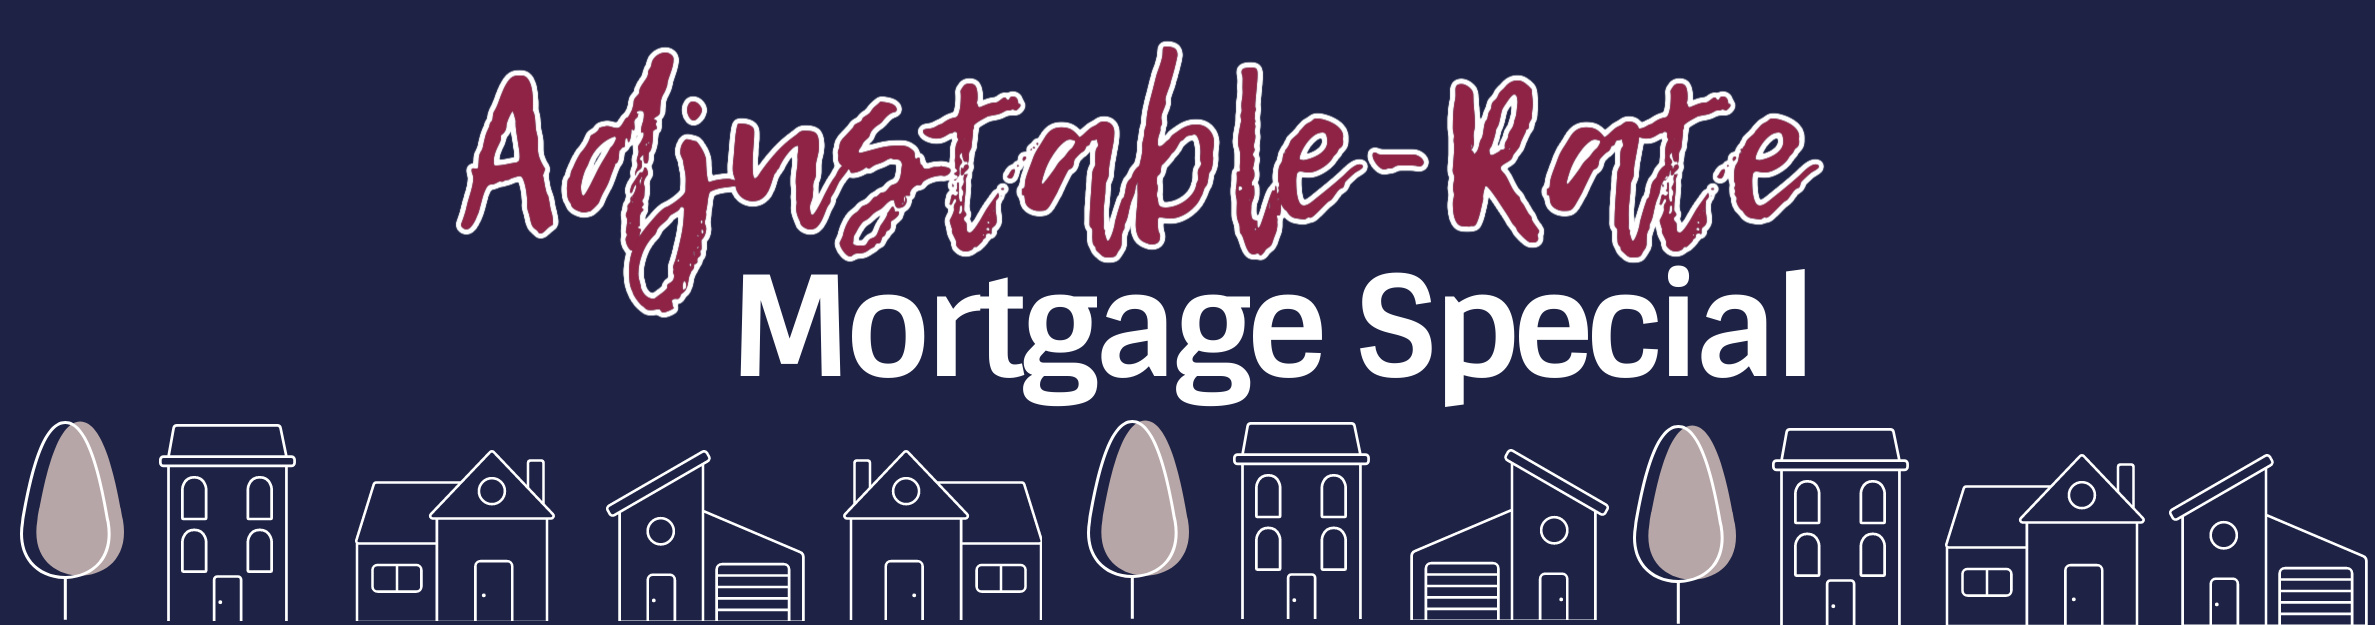 Adjustable-Rate Mortgage Special